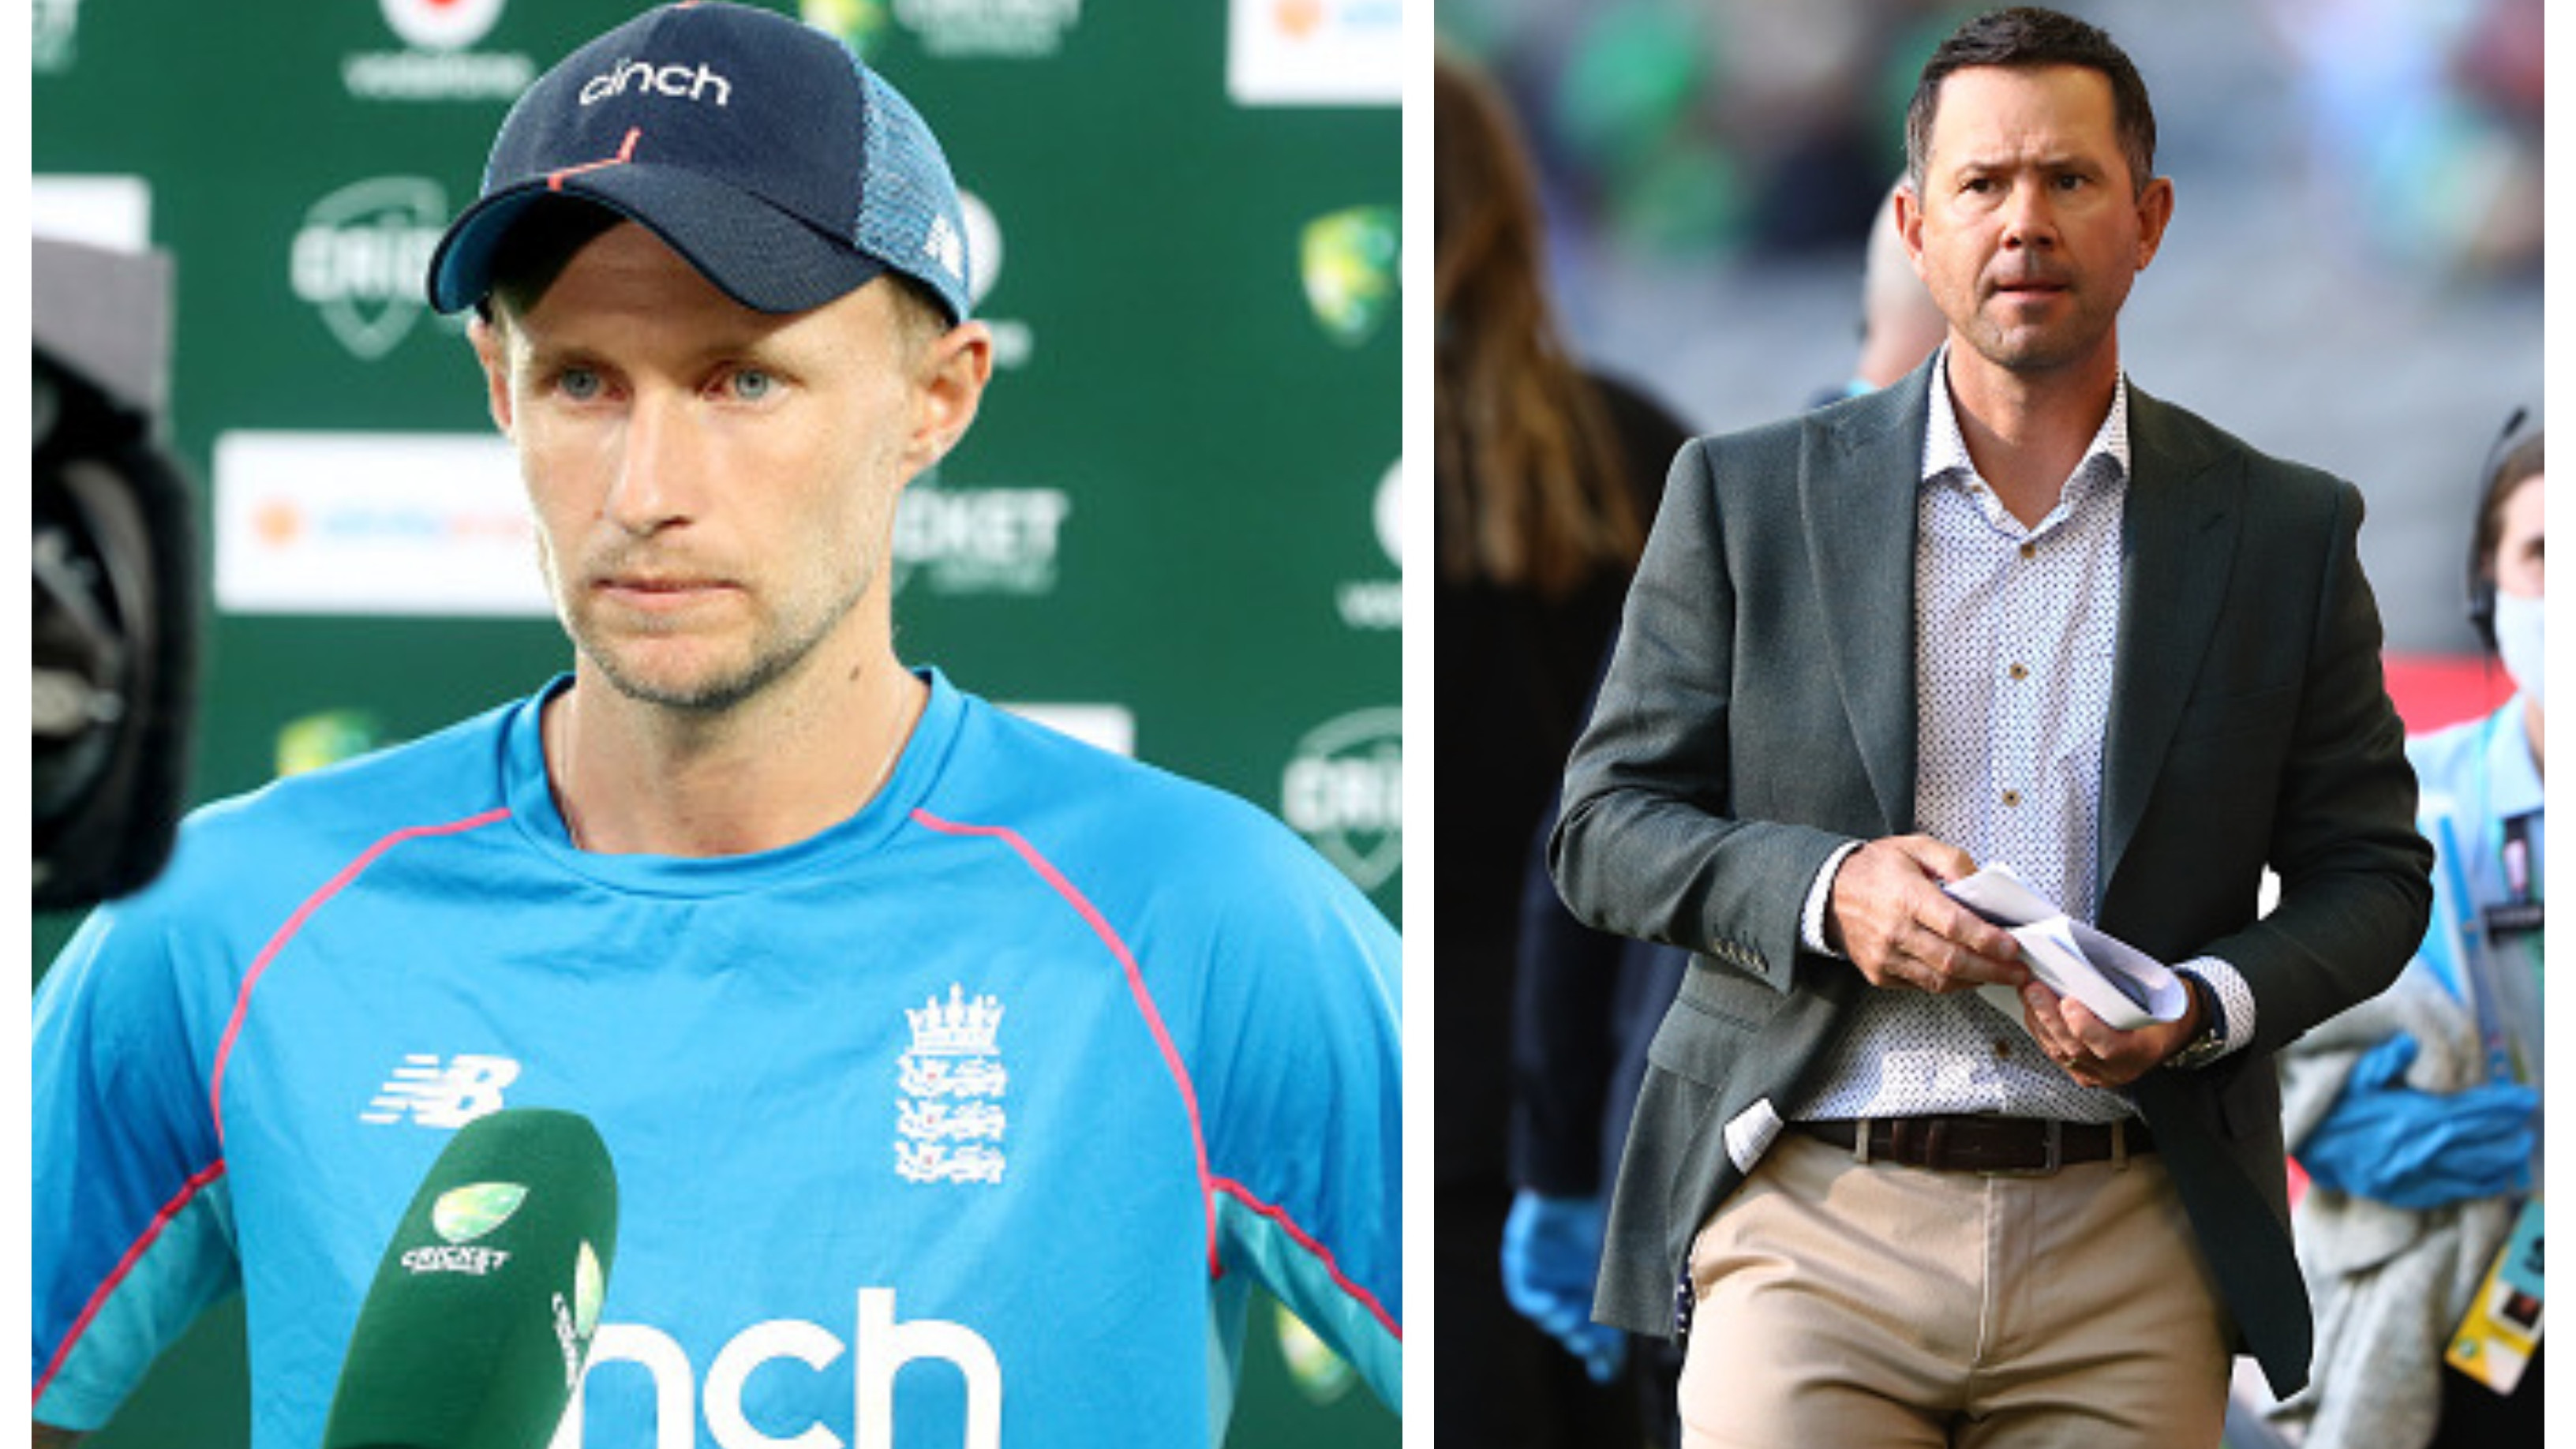 Ashes 2021-22: “Why are you captain then?”, Ponting slams Root’s comments on England bowlers